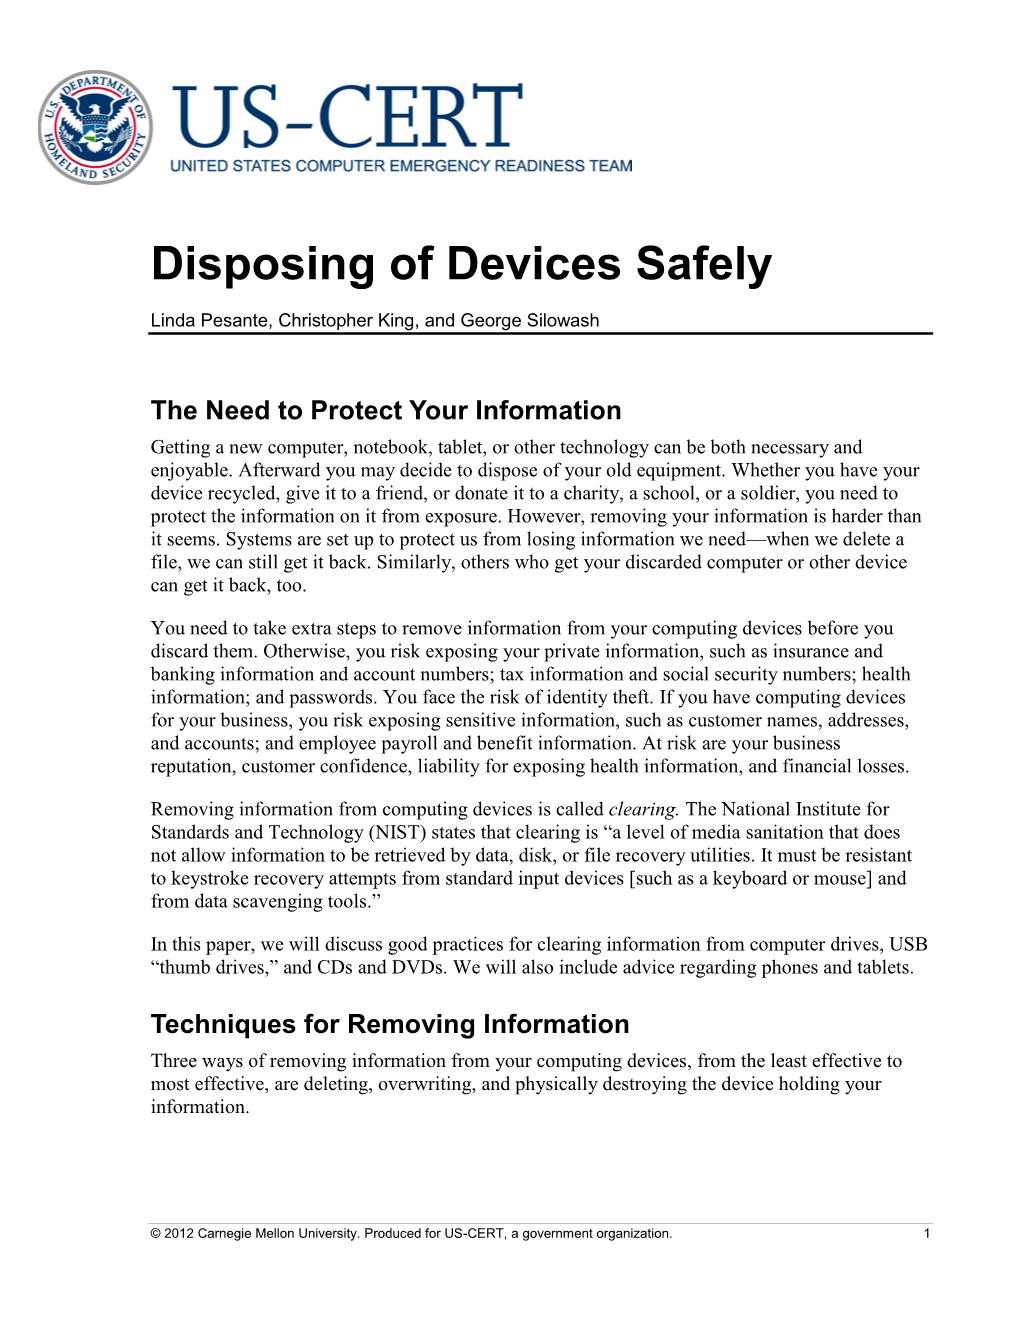 Disposing of Devices Safely